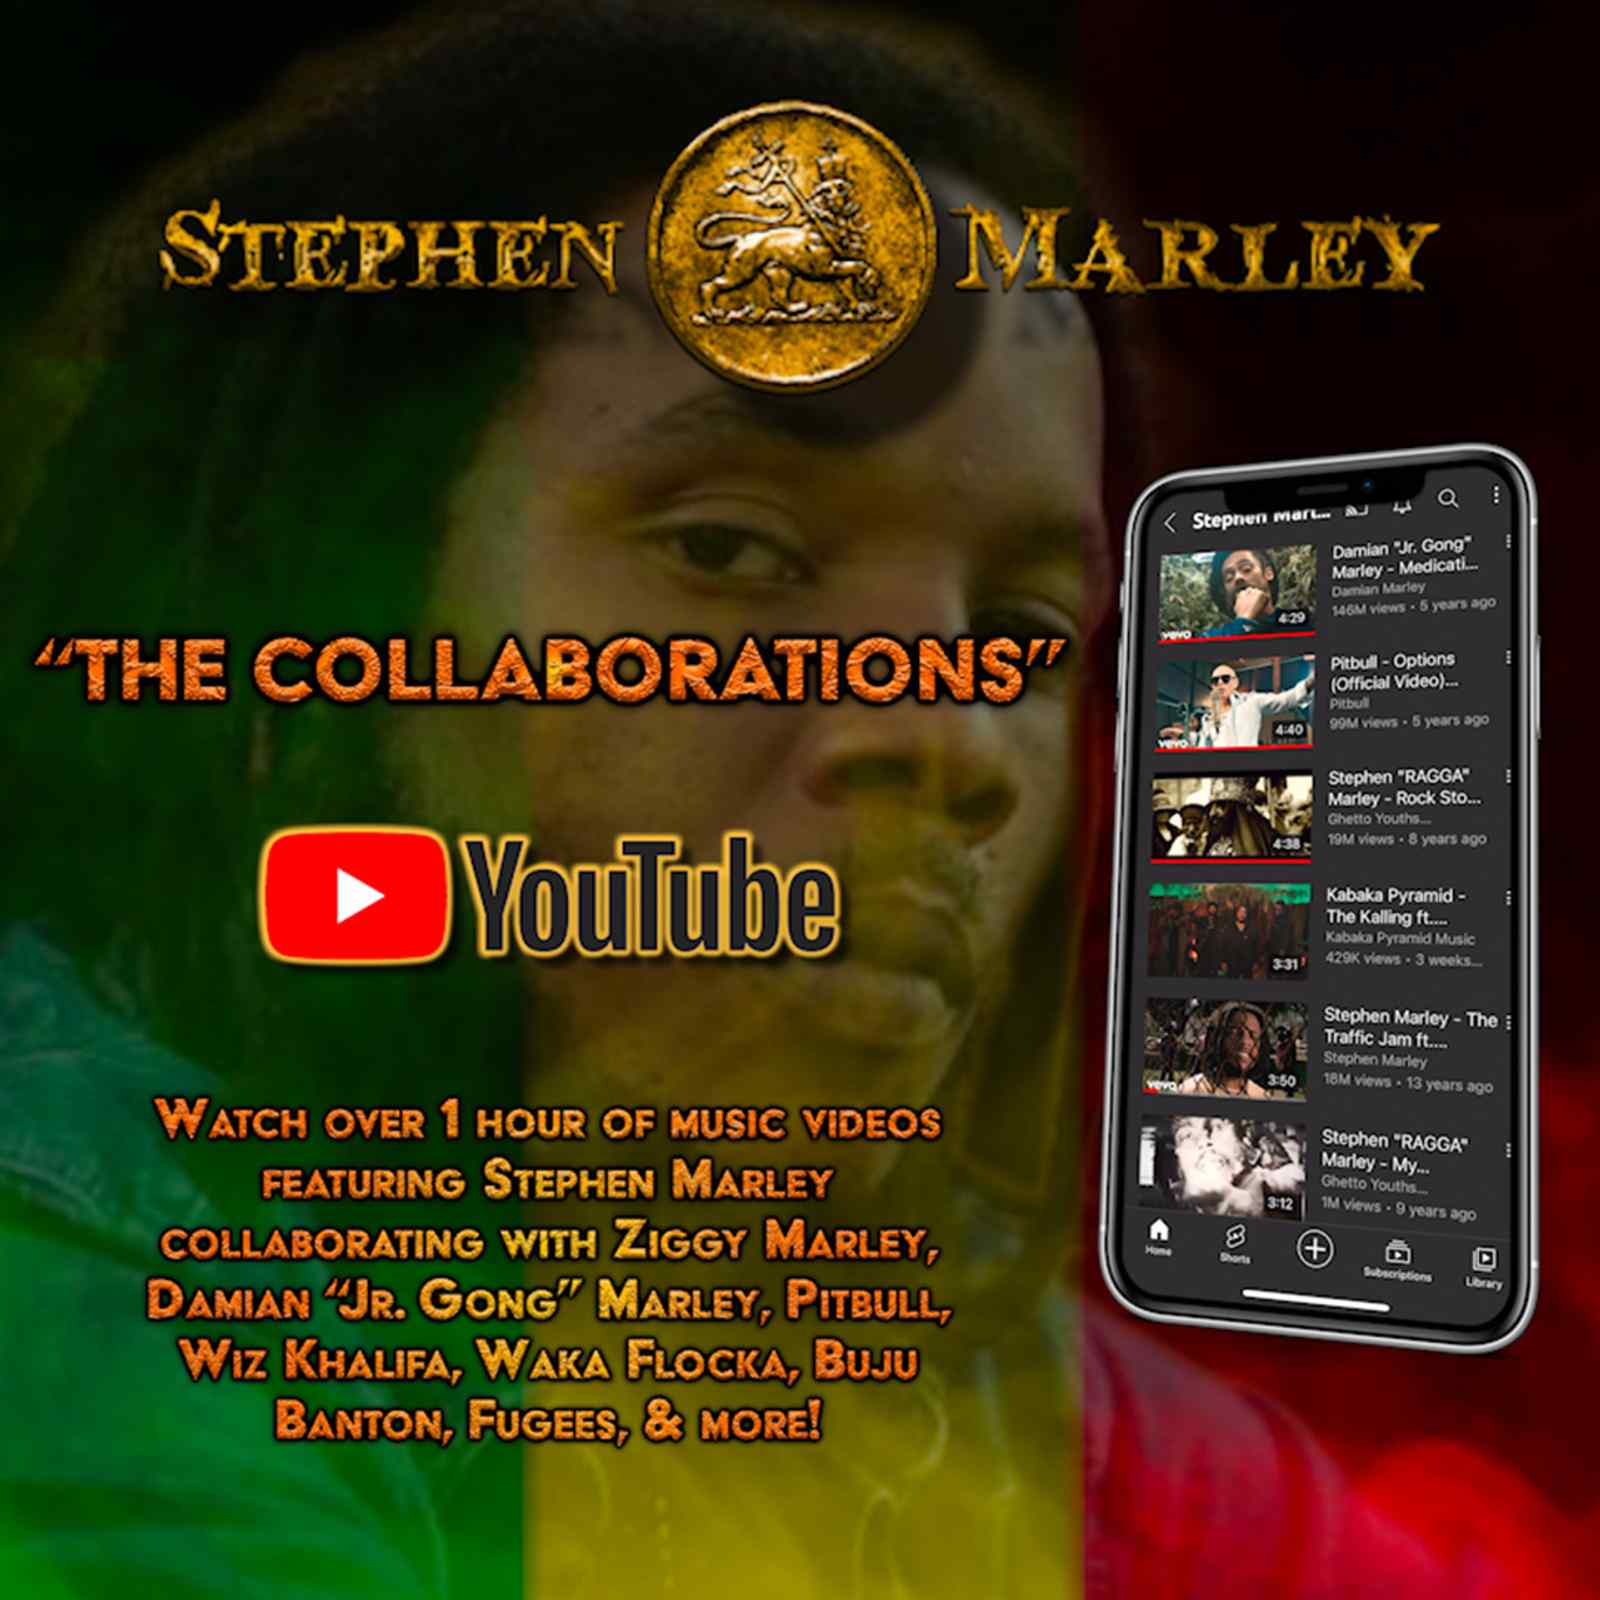 New Playlist on YouTube: "The Collaborations"